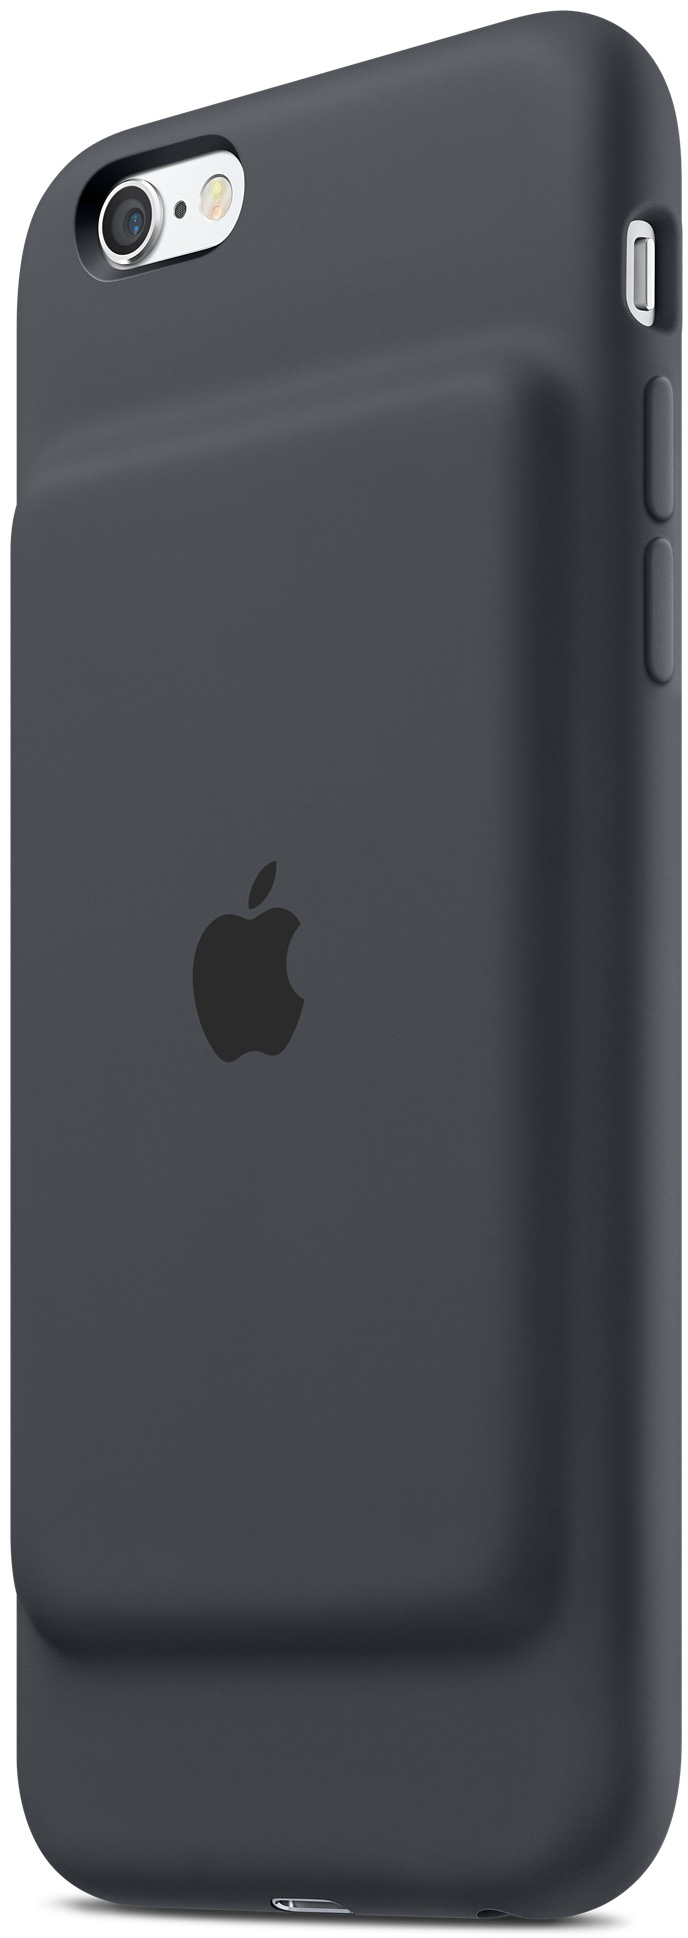 iPhone 6s Smart Battery Case - Charcoal Gray